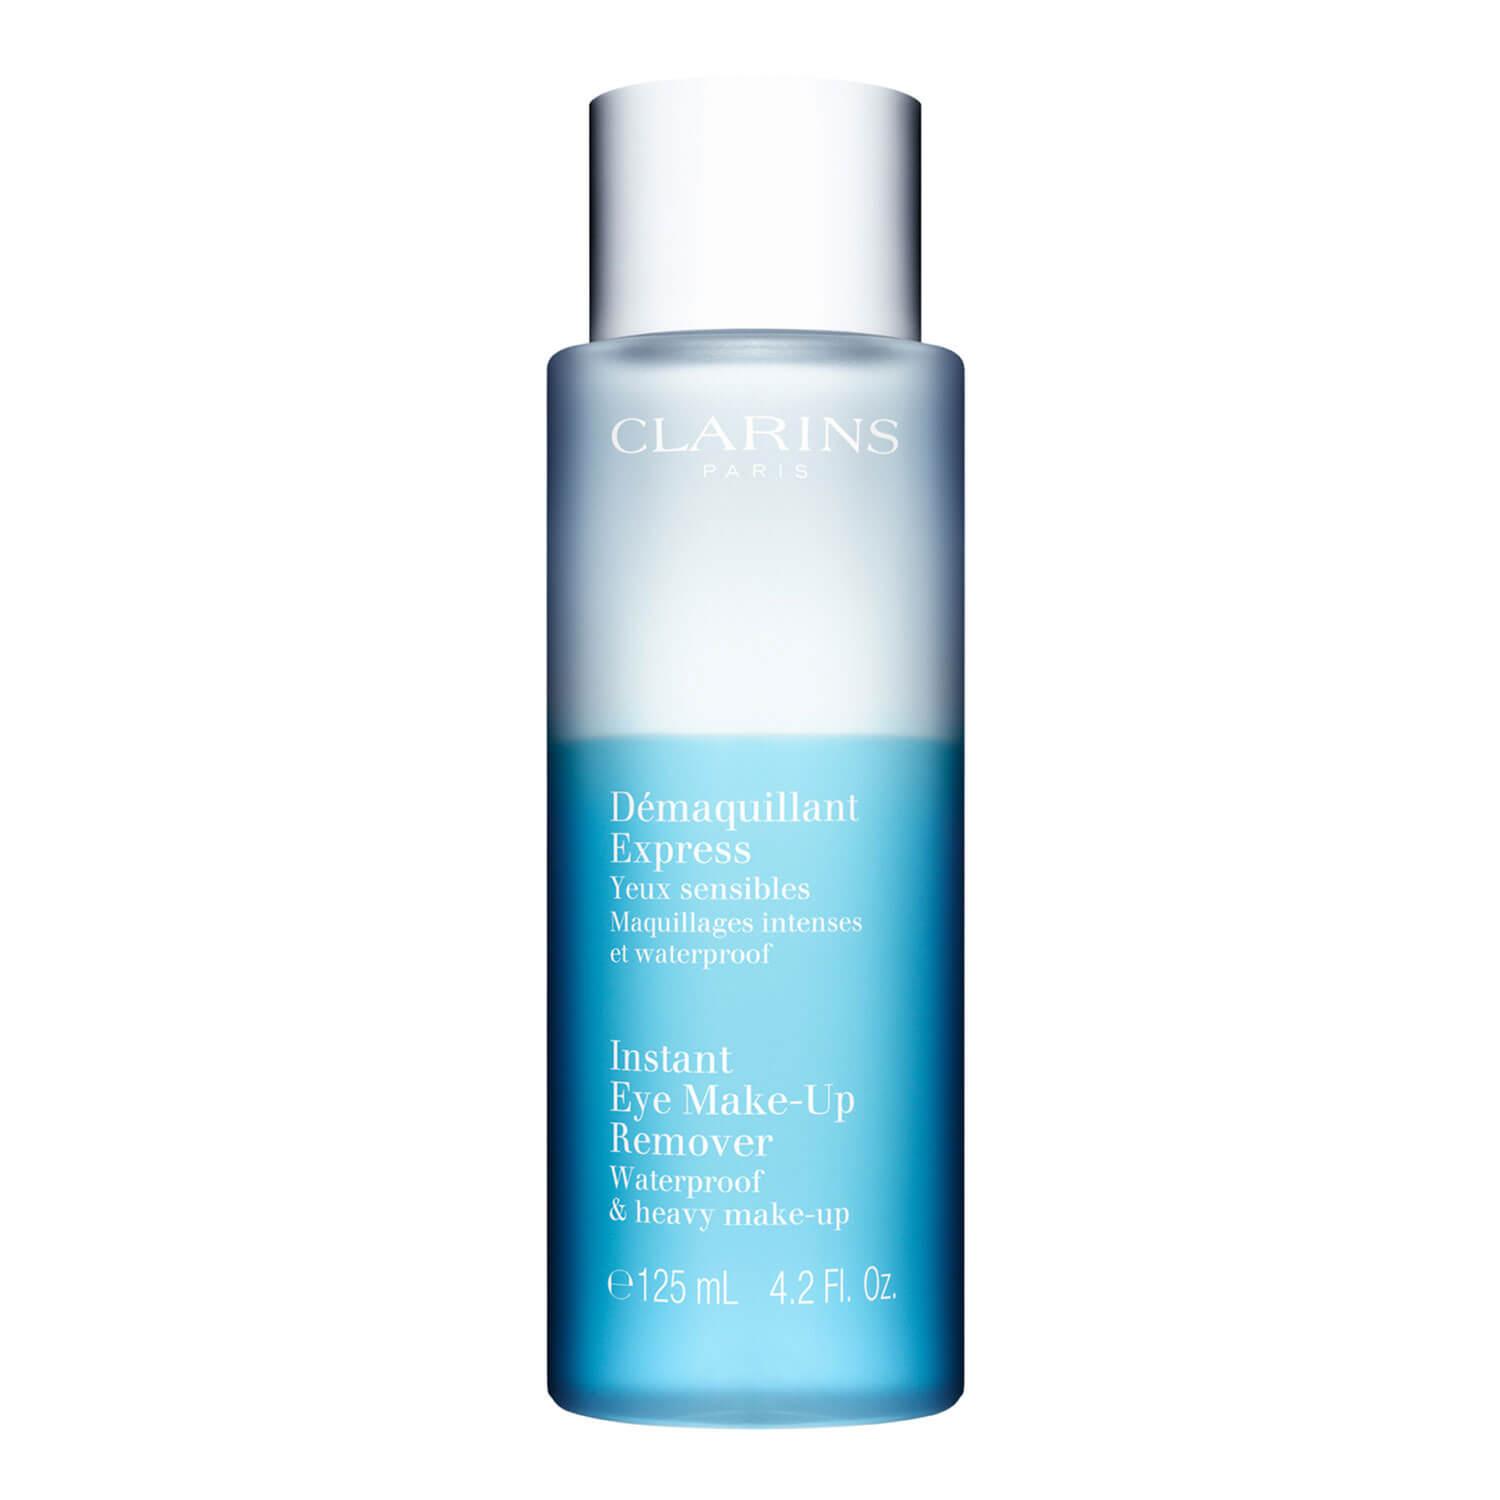 Clarins Skin - Démaquillant Express